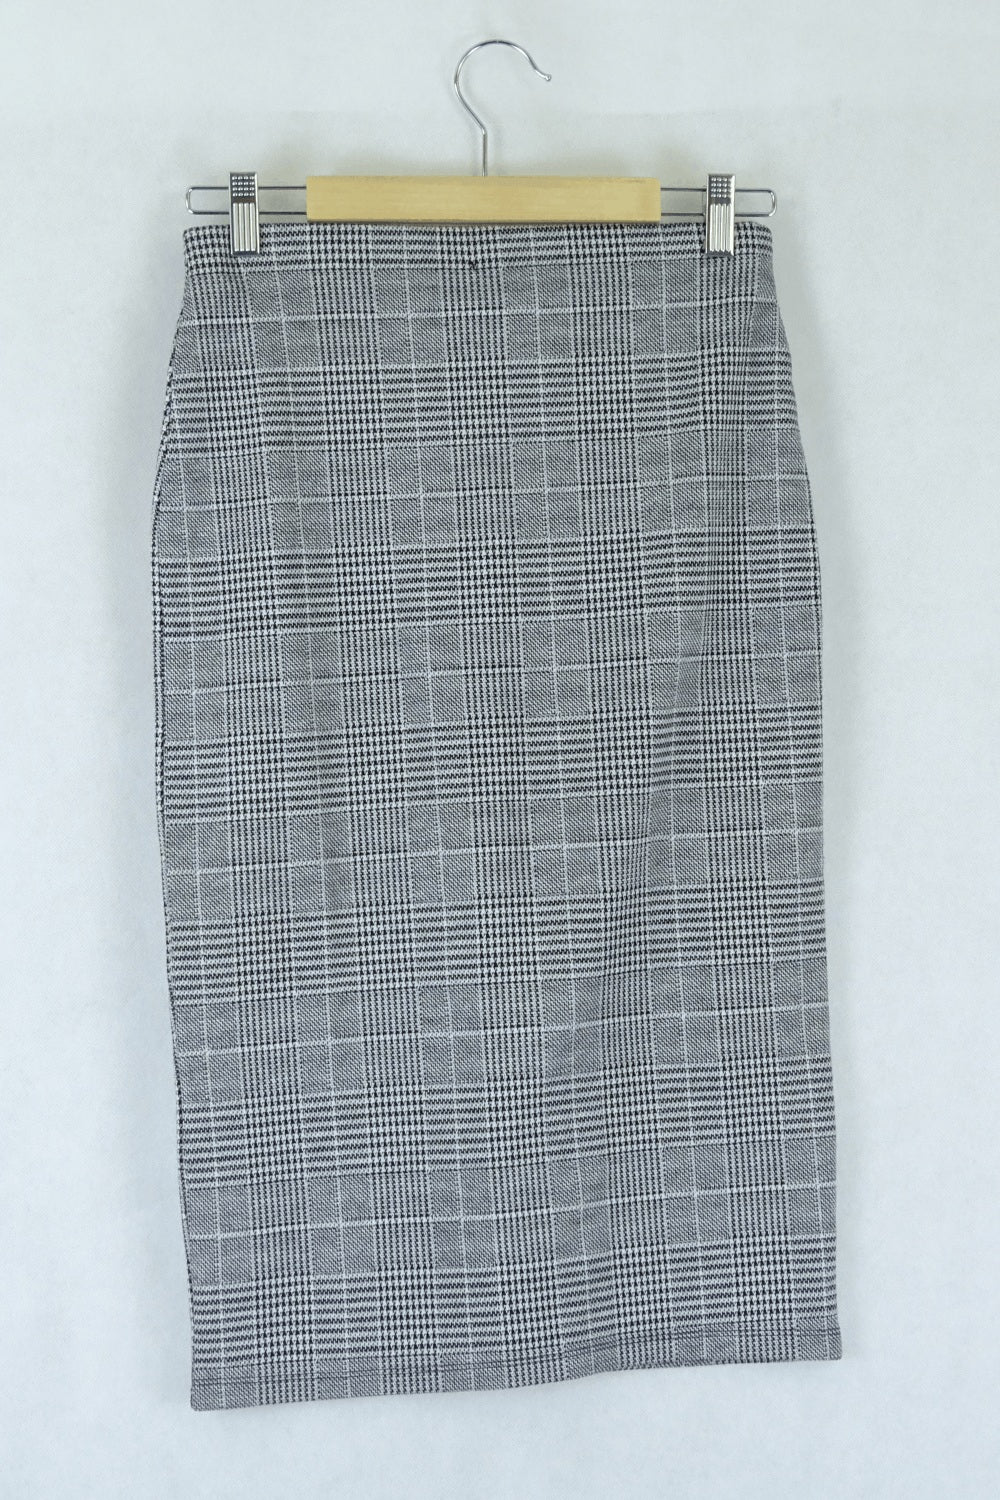 H&amp;M Black and White Checked Pencil Skirt  S